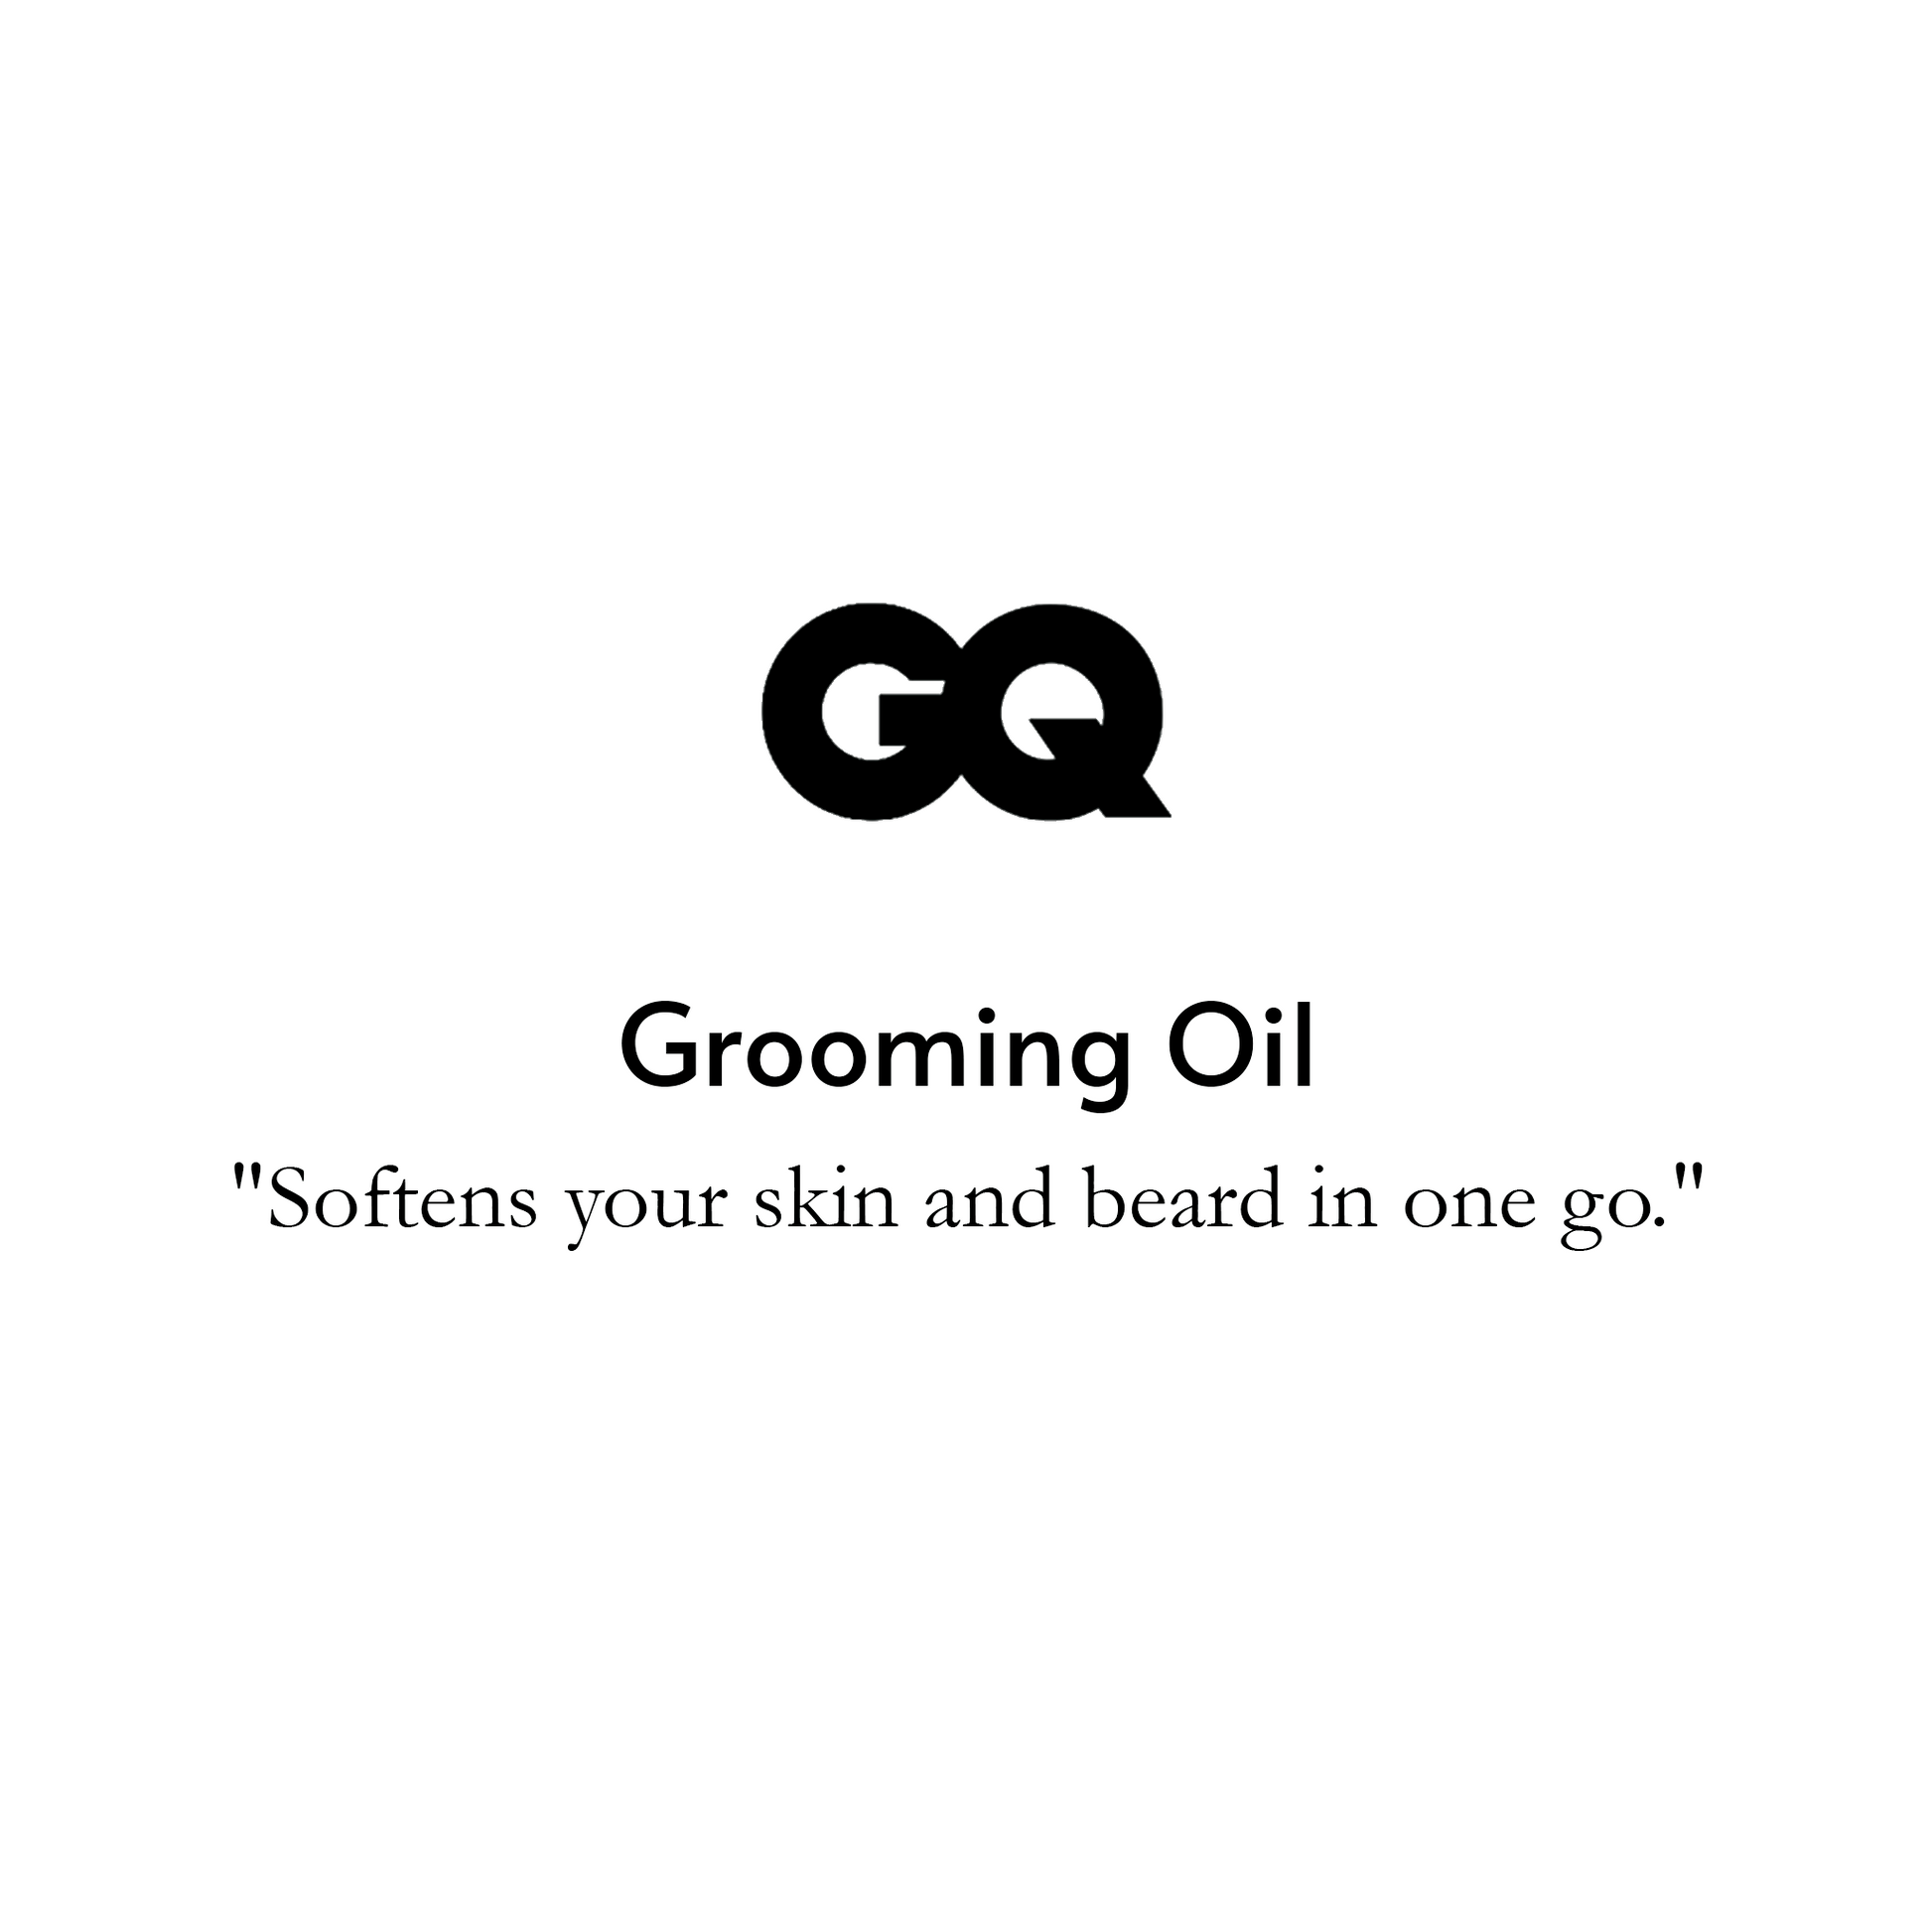 Grooming Oil, "Softens your skin and beard in one go."